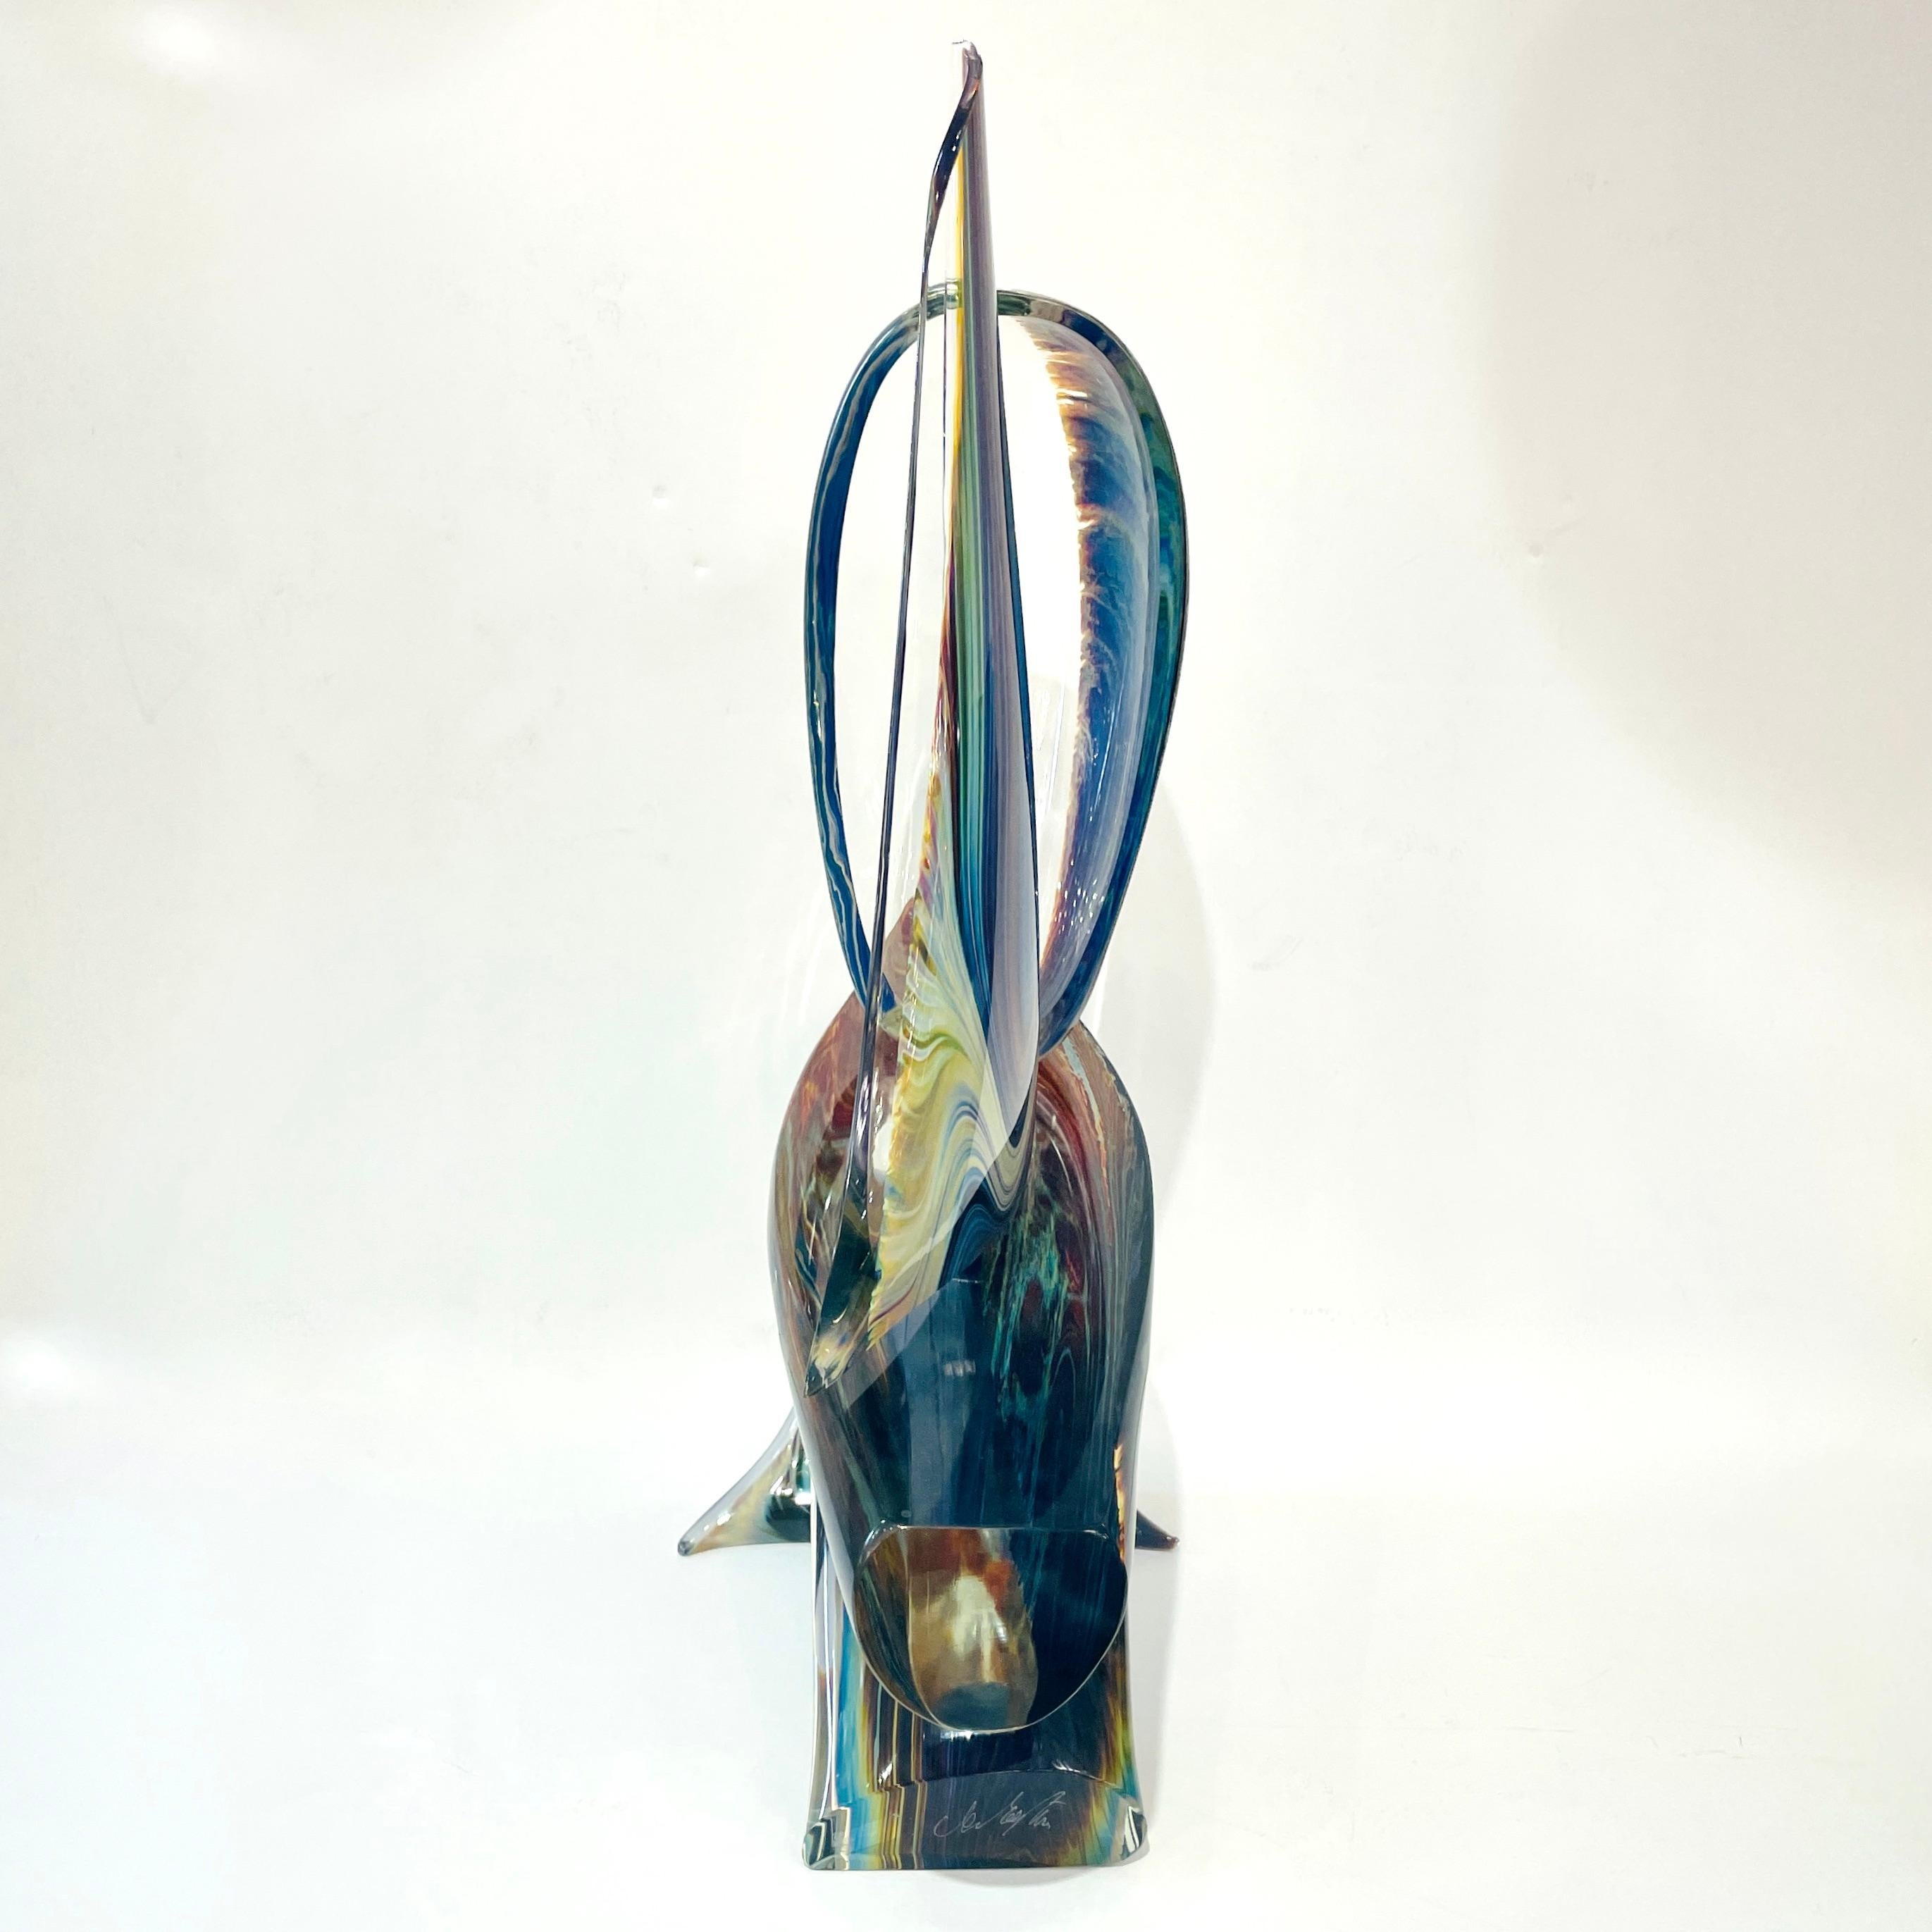 2015 Italian Yellow Blue Brown Crystal Murano Glass Boat Modernist Art Sculpture For Sale 2